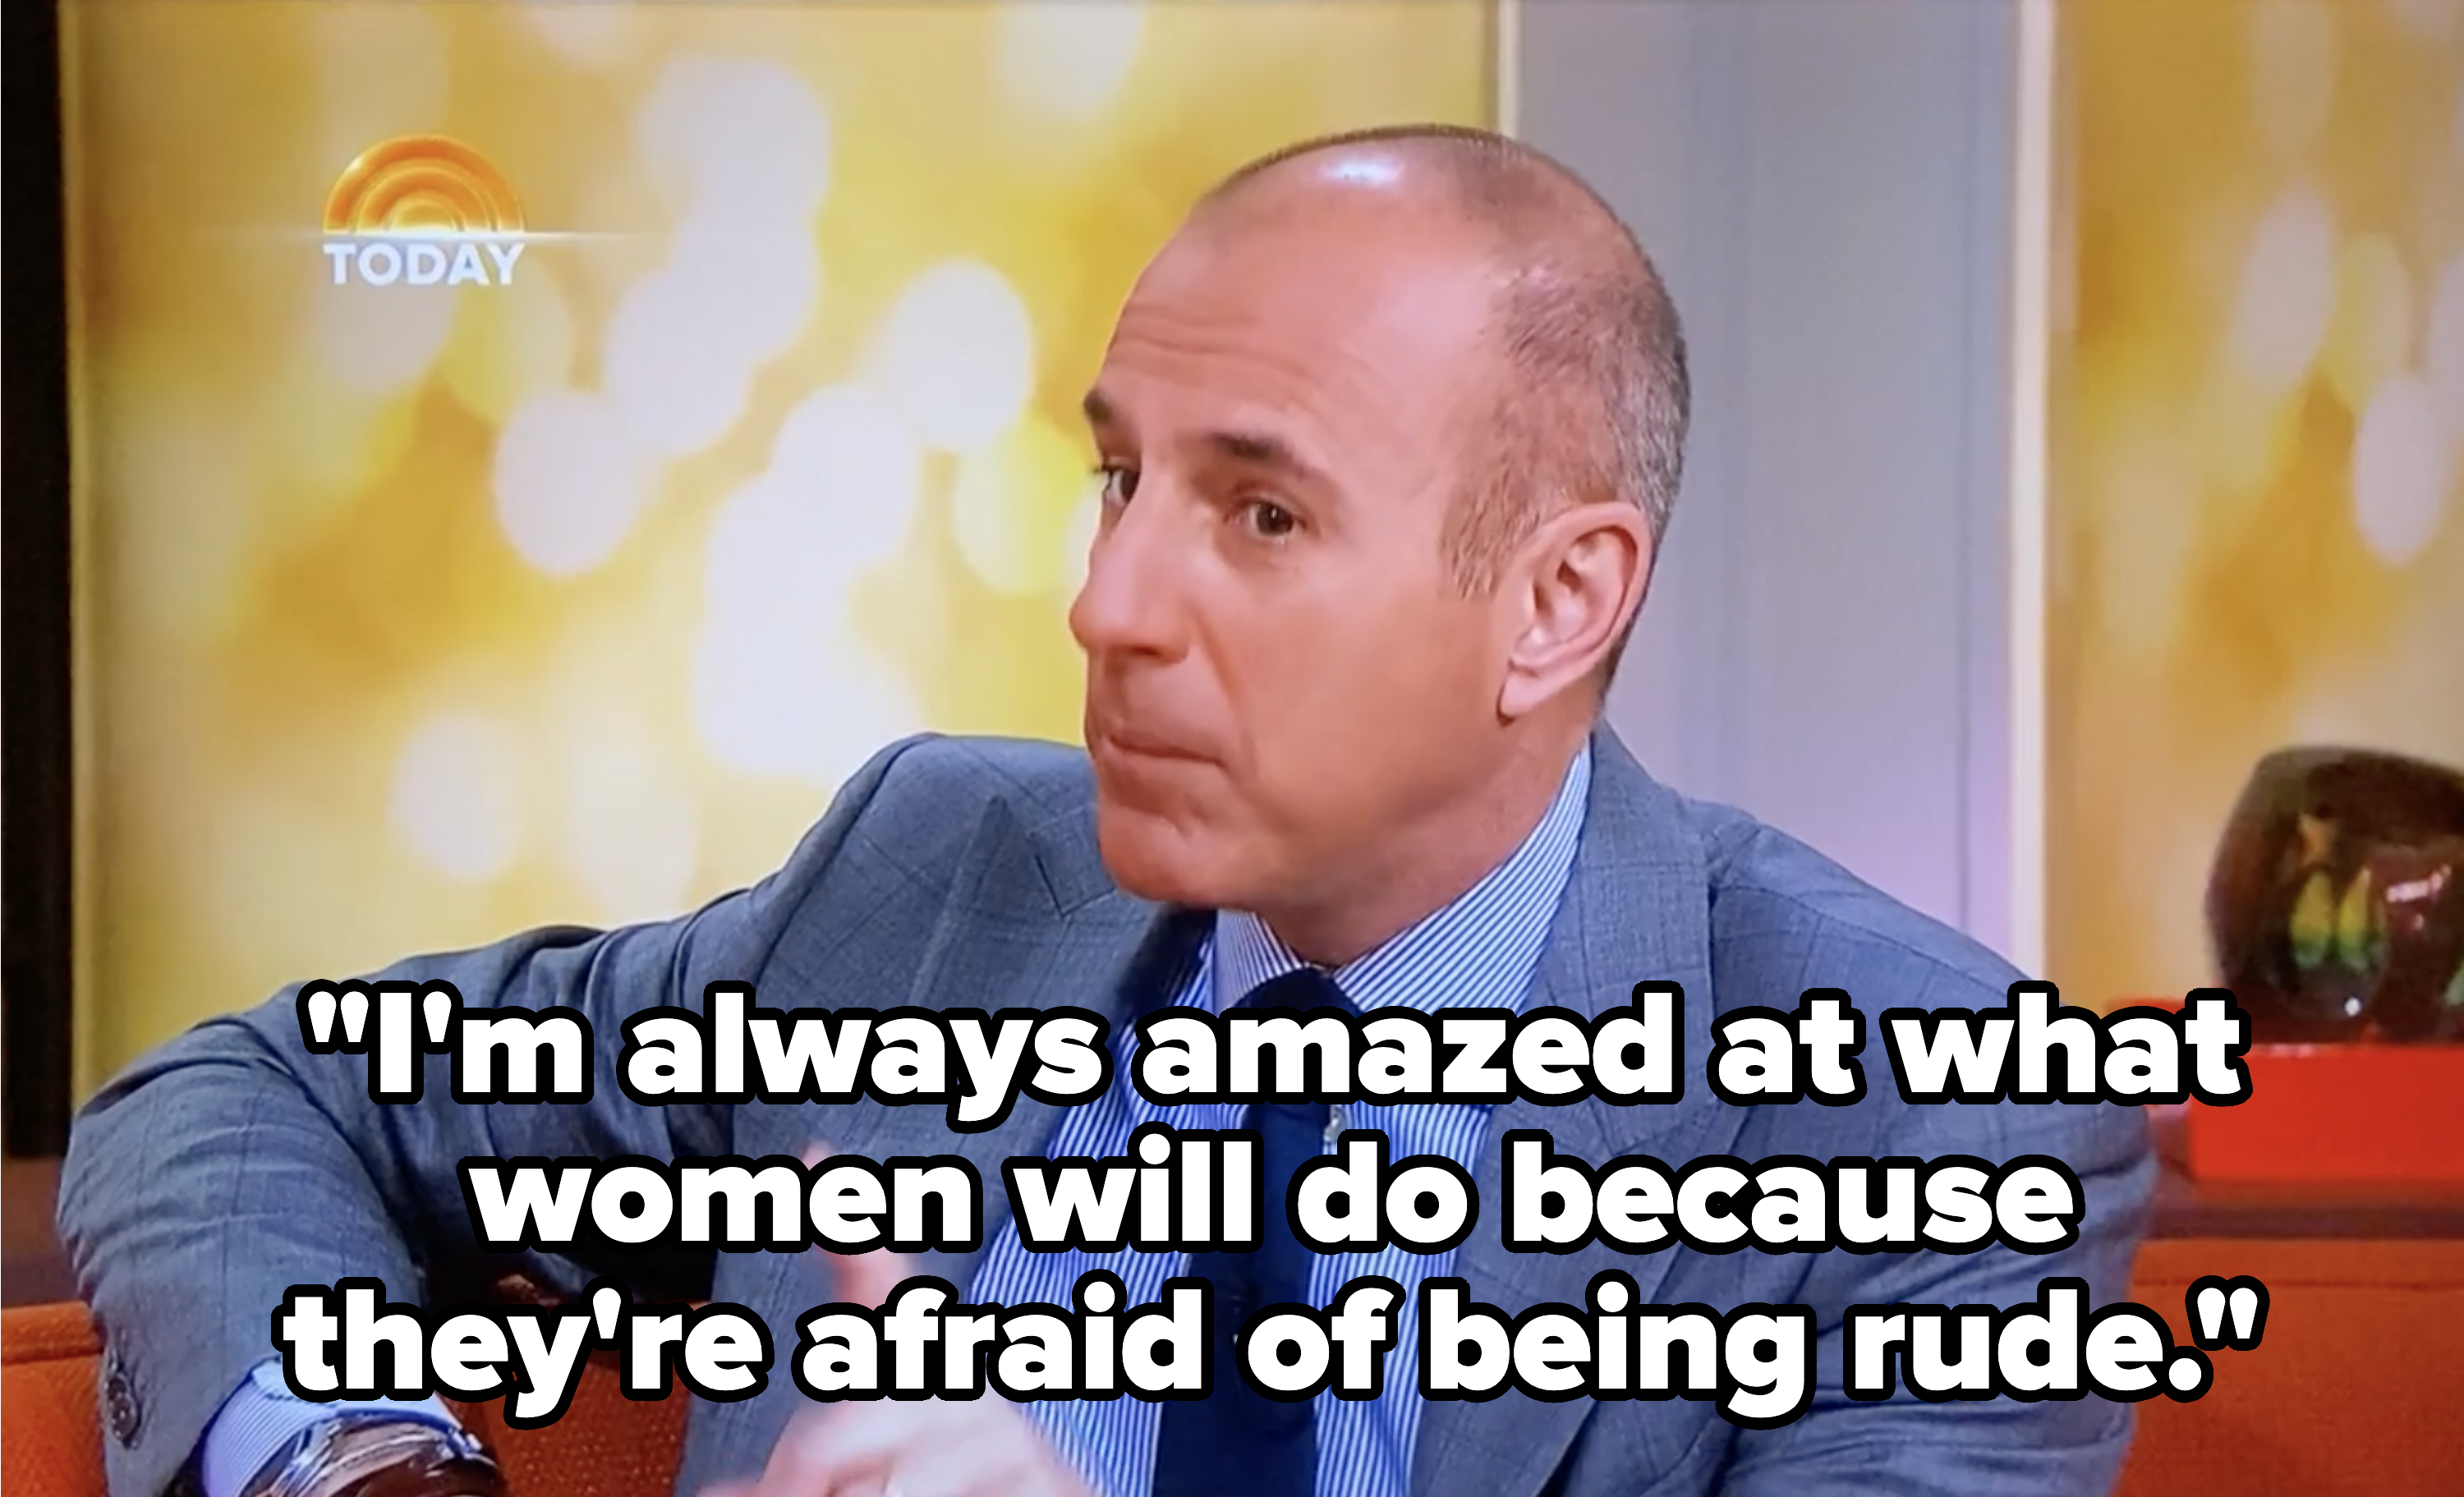 Matt Lauer wearing a suit, sitting and talking on the Today Show set